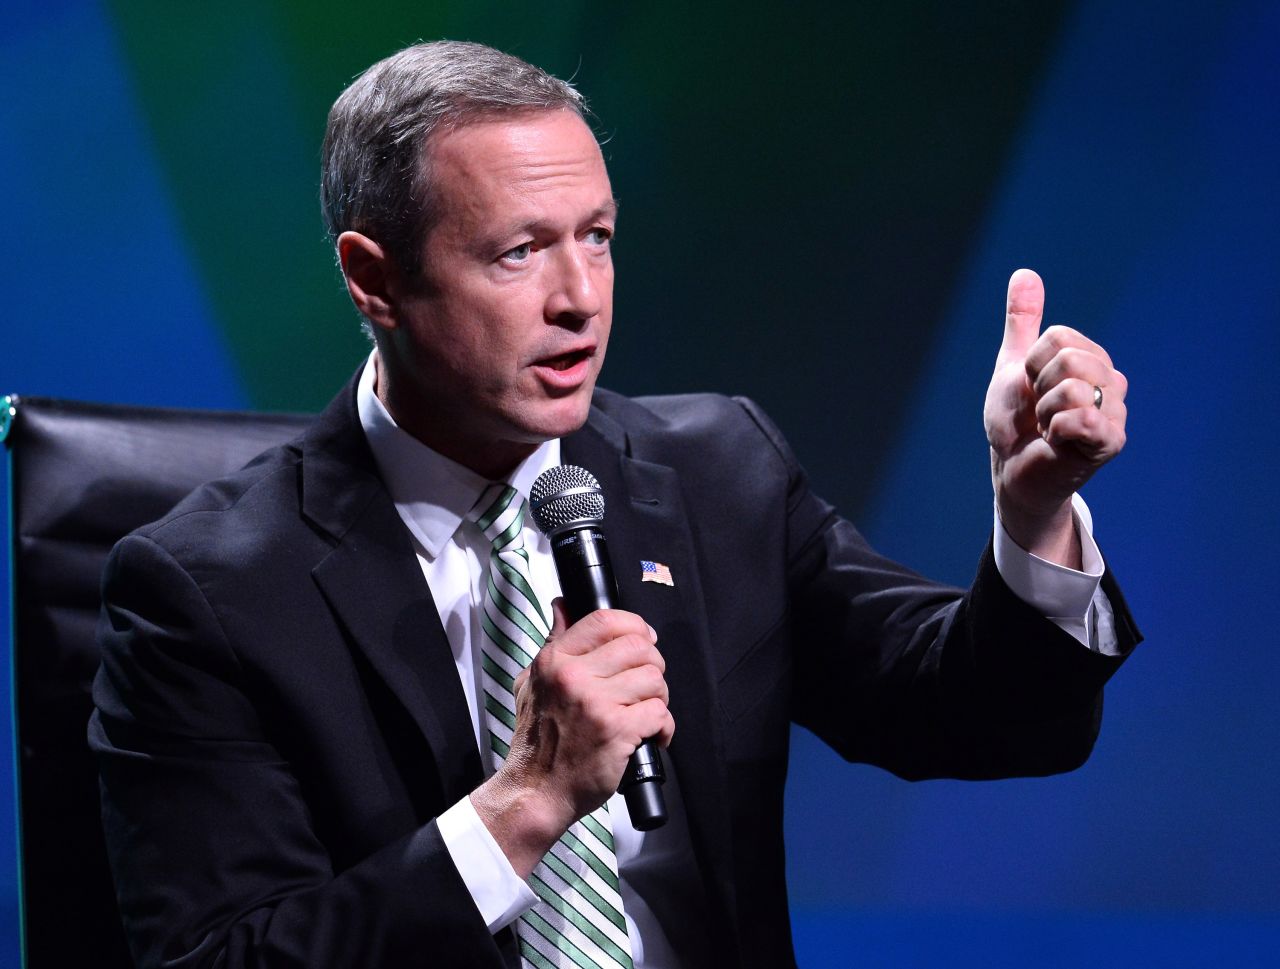 O'Malley speaks during the National Clean Energy Summit 6.0 on August 13, 2013 in Las Vegas.